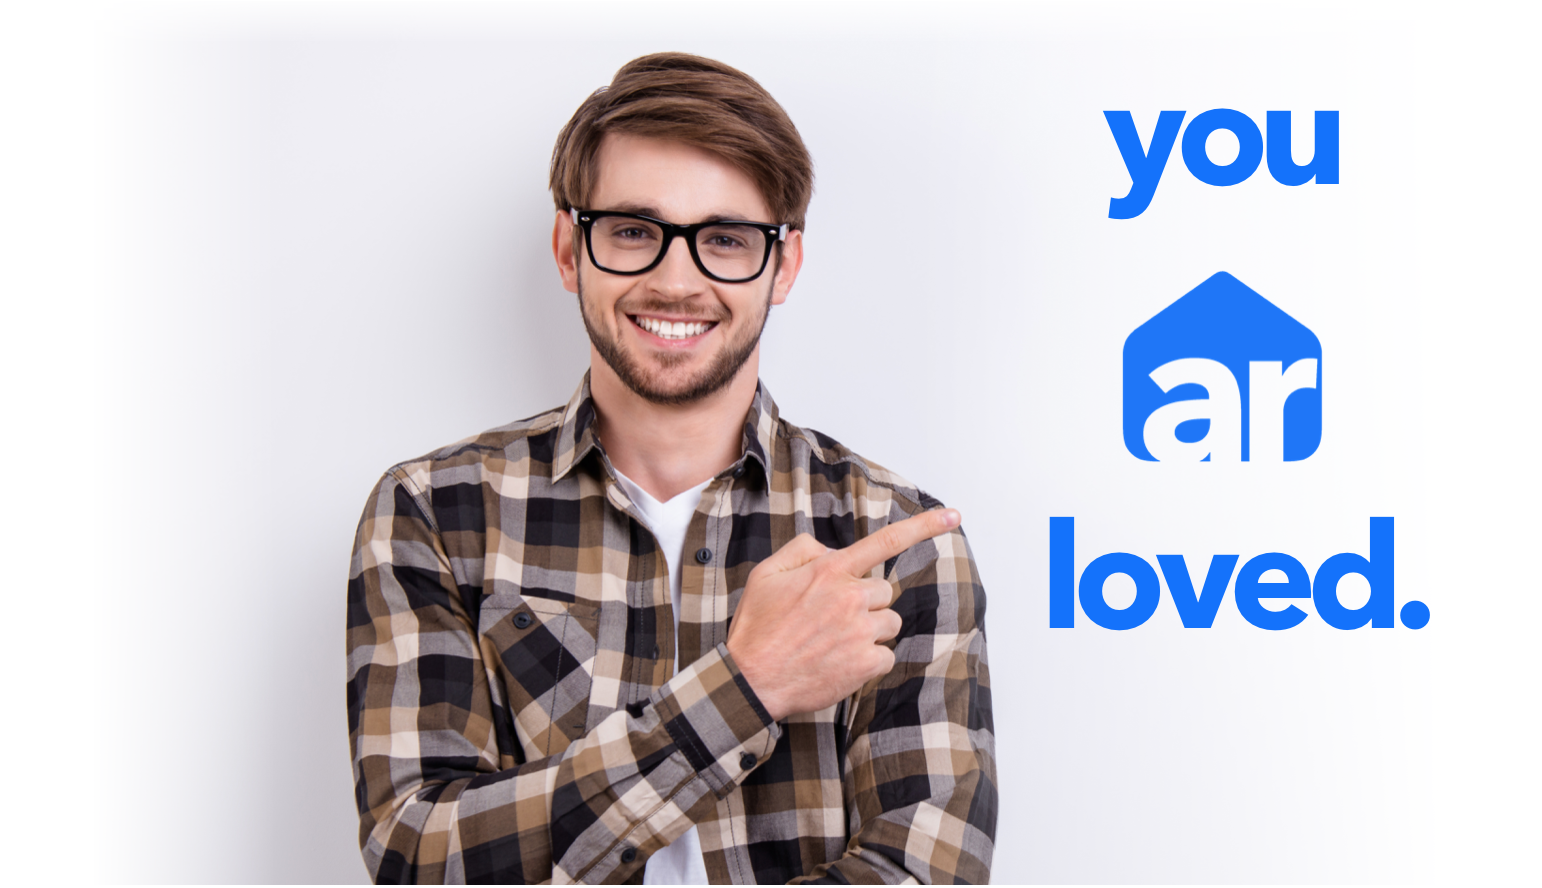 man in glasses and plaid shirt pointing at 'you ar loved' trademark branding logo